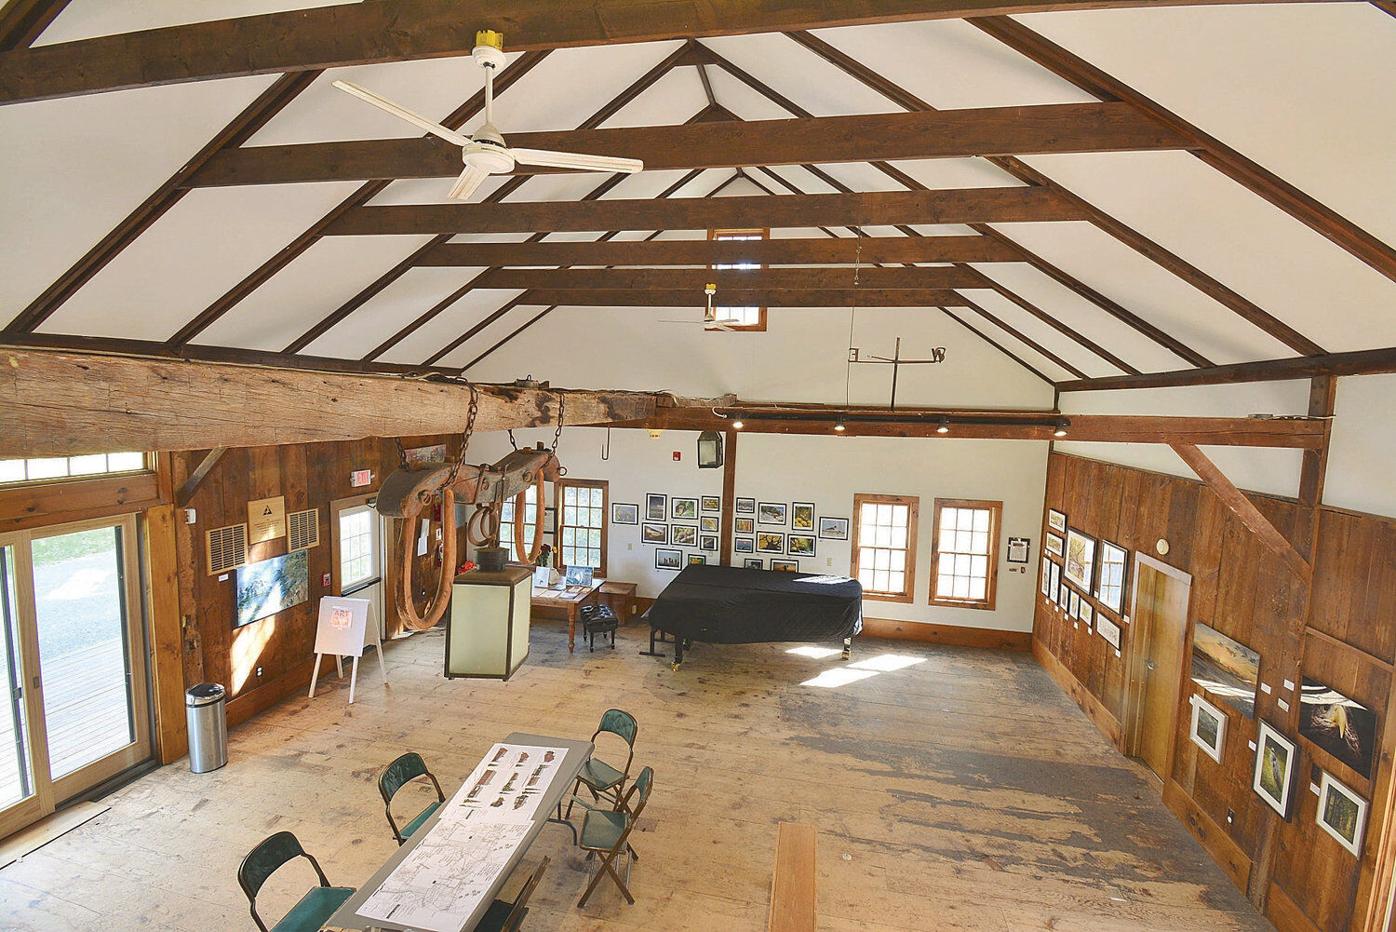 Pleasant Valley Wildlife Sanctuary Barn Project Would Be A Gem For Lenox Archives Berkshireeaglecom